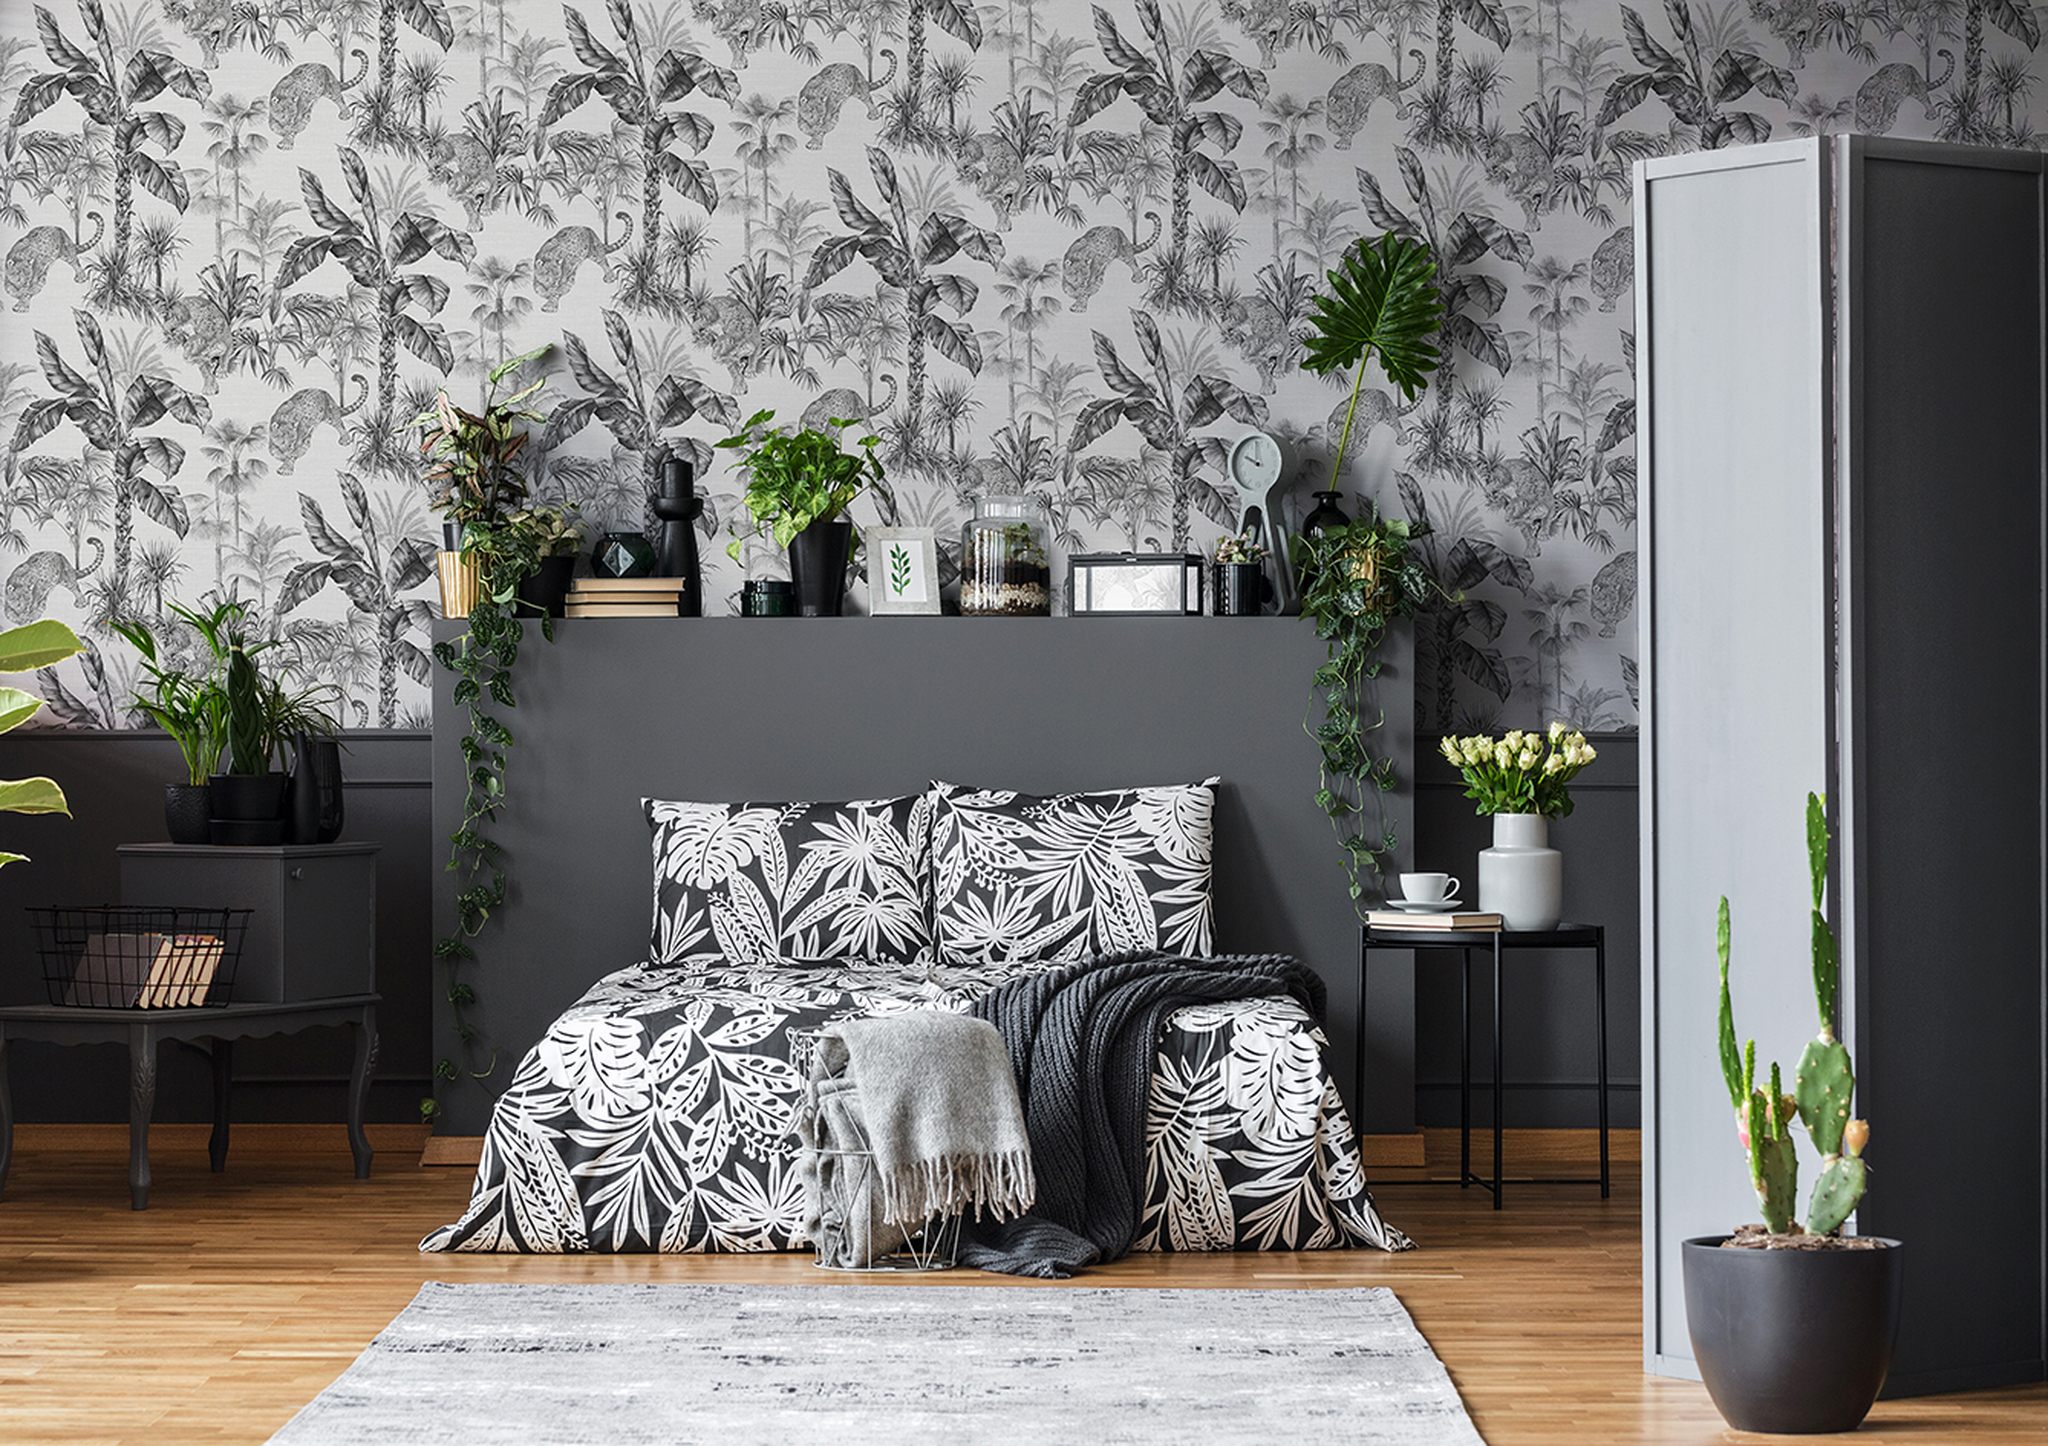 The 108598 Zanzibar Grey Wallpaper features majestic leopards prowling around a tropical foliage in this beautiful jungle design